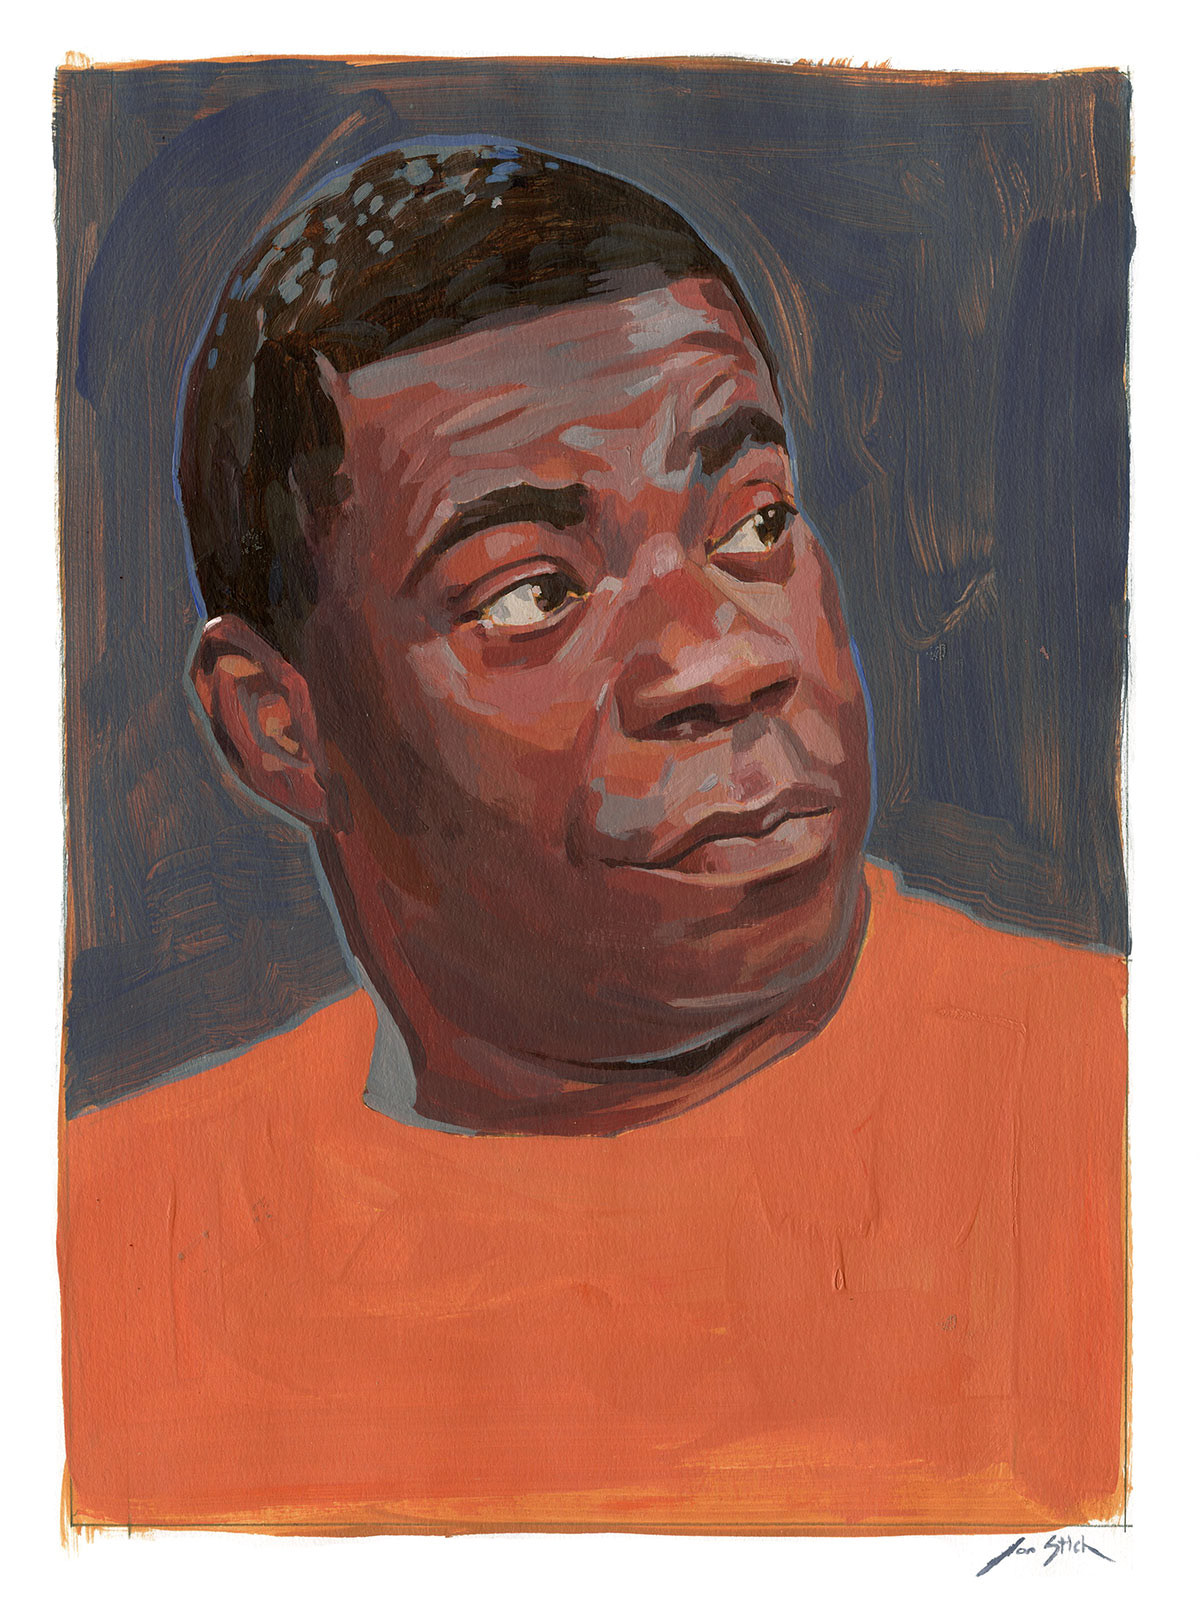 Tracy Morgan snl 30 rock comedian Celebrity portrait traditional painterly Classic ILLUSTRATION 